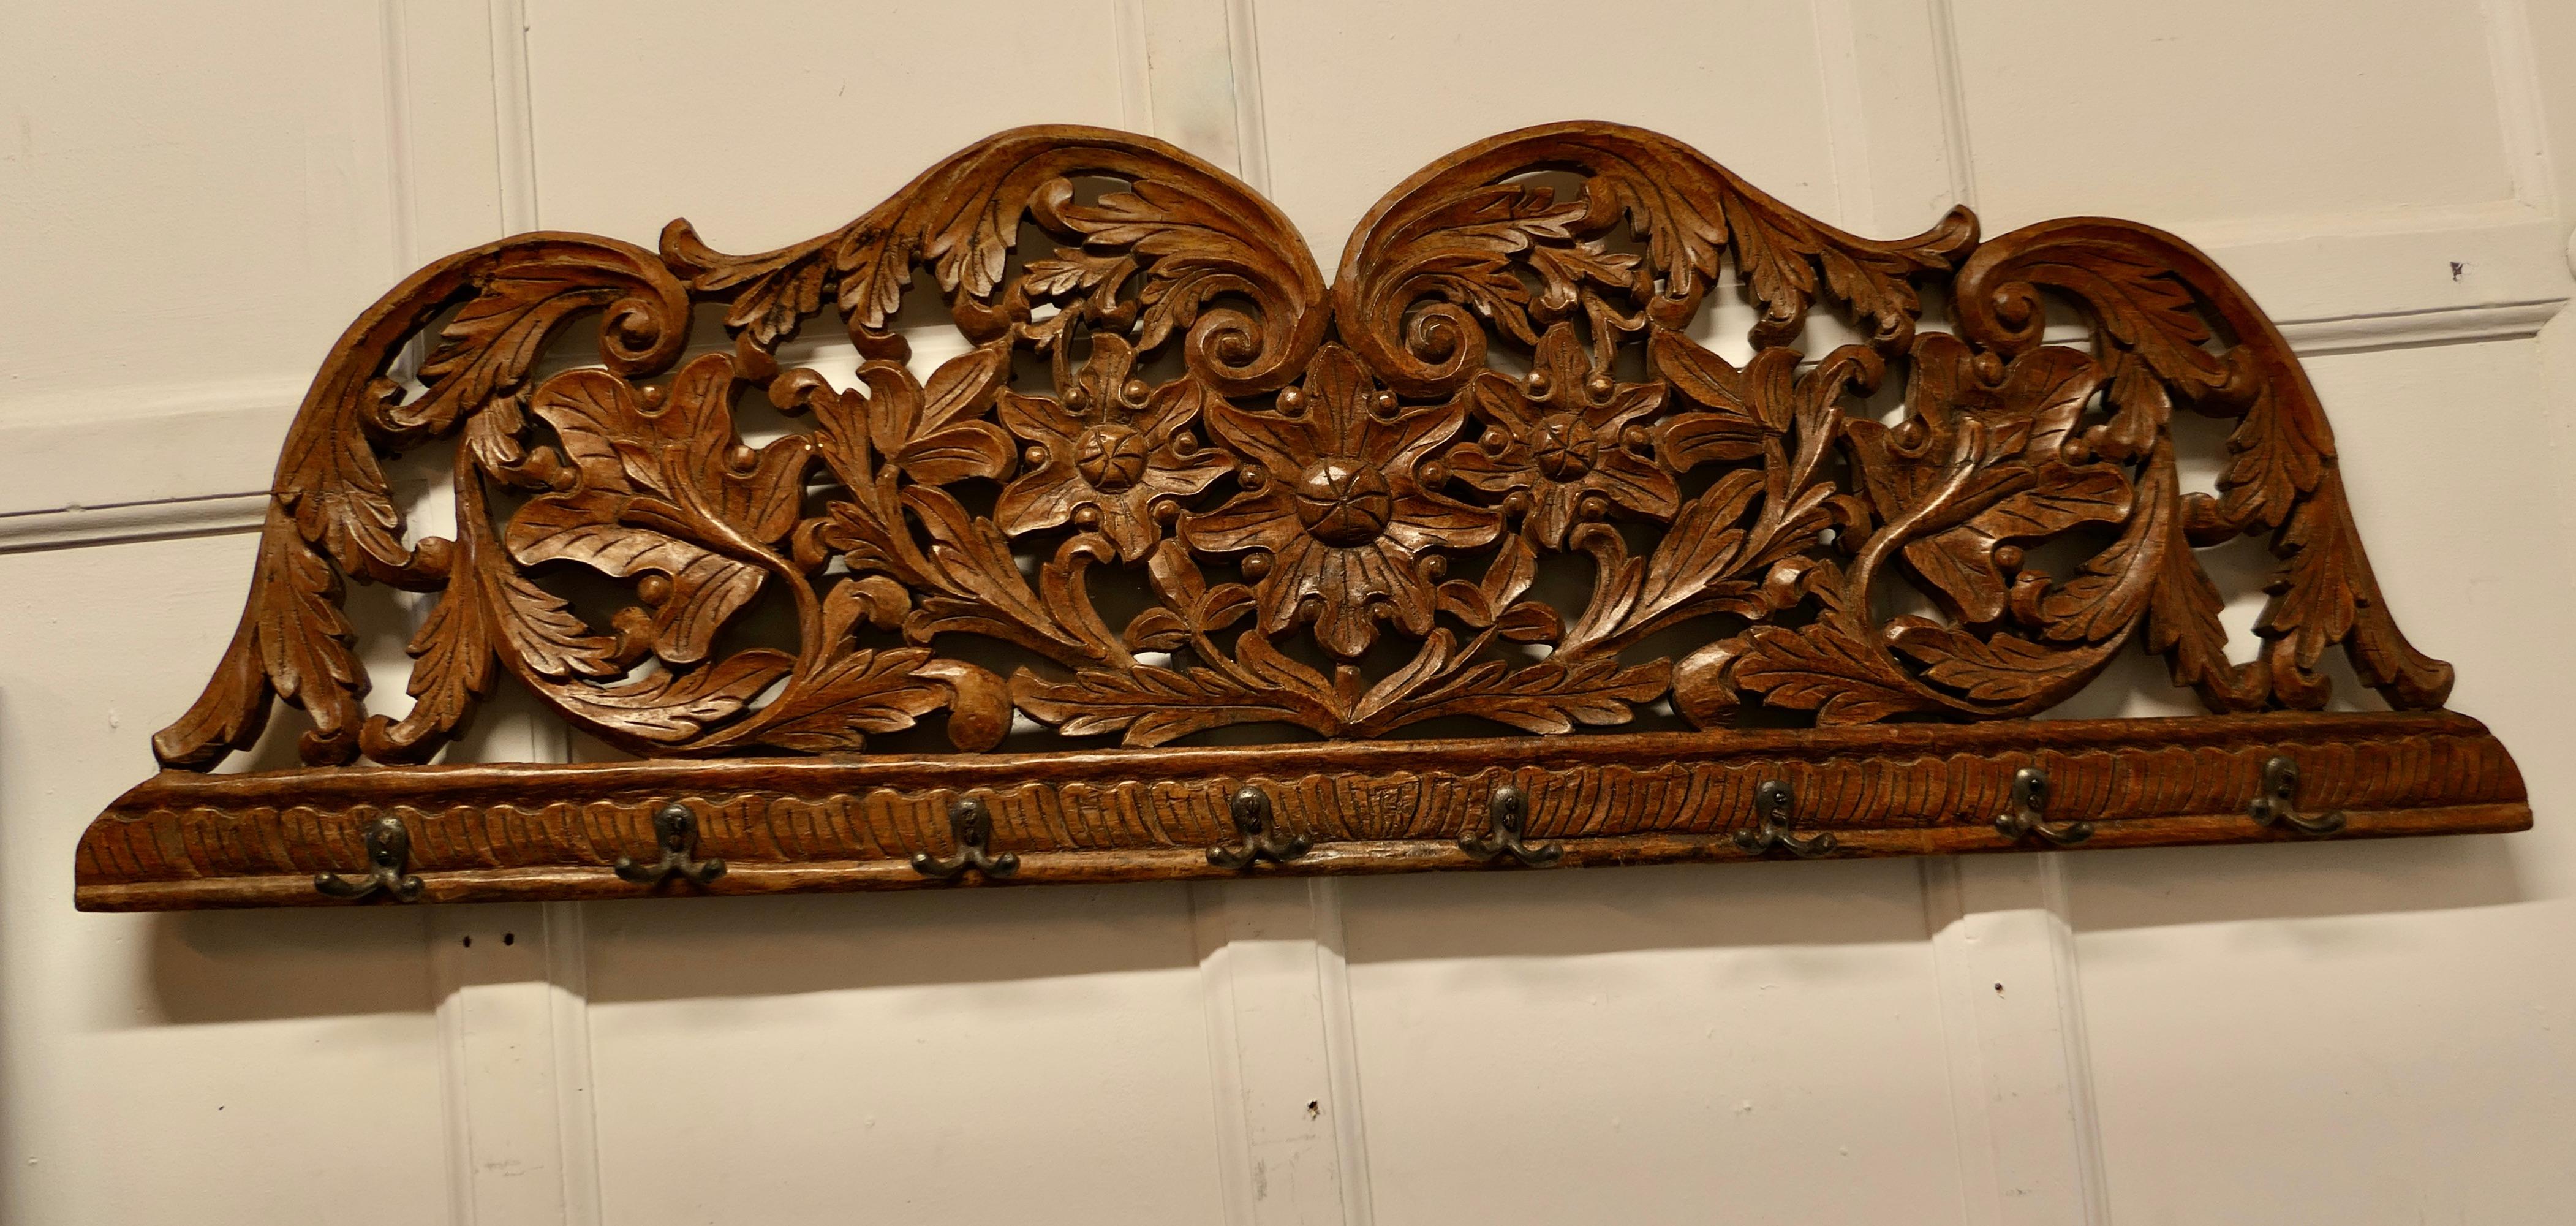 19th century Carved teak wall hanging coat rack.

 19th century Carved wall hanging coat rack for coats umbrellas or hats.

This is a solid carved wall piece, it is profusely carved with leaves and flowers, below there are 8 double hooks.
The